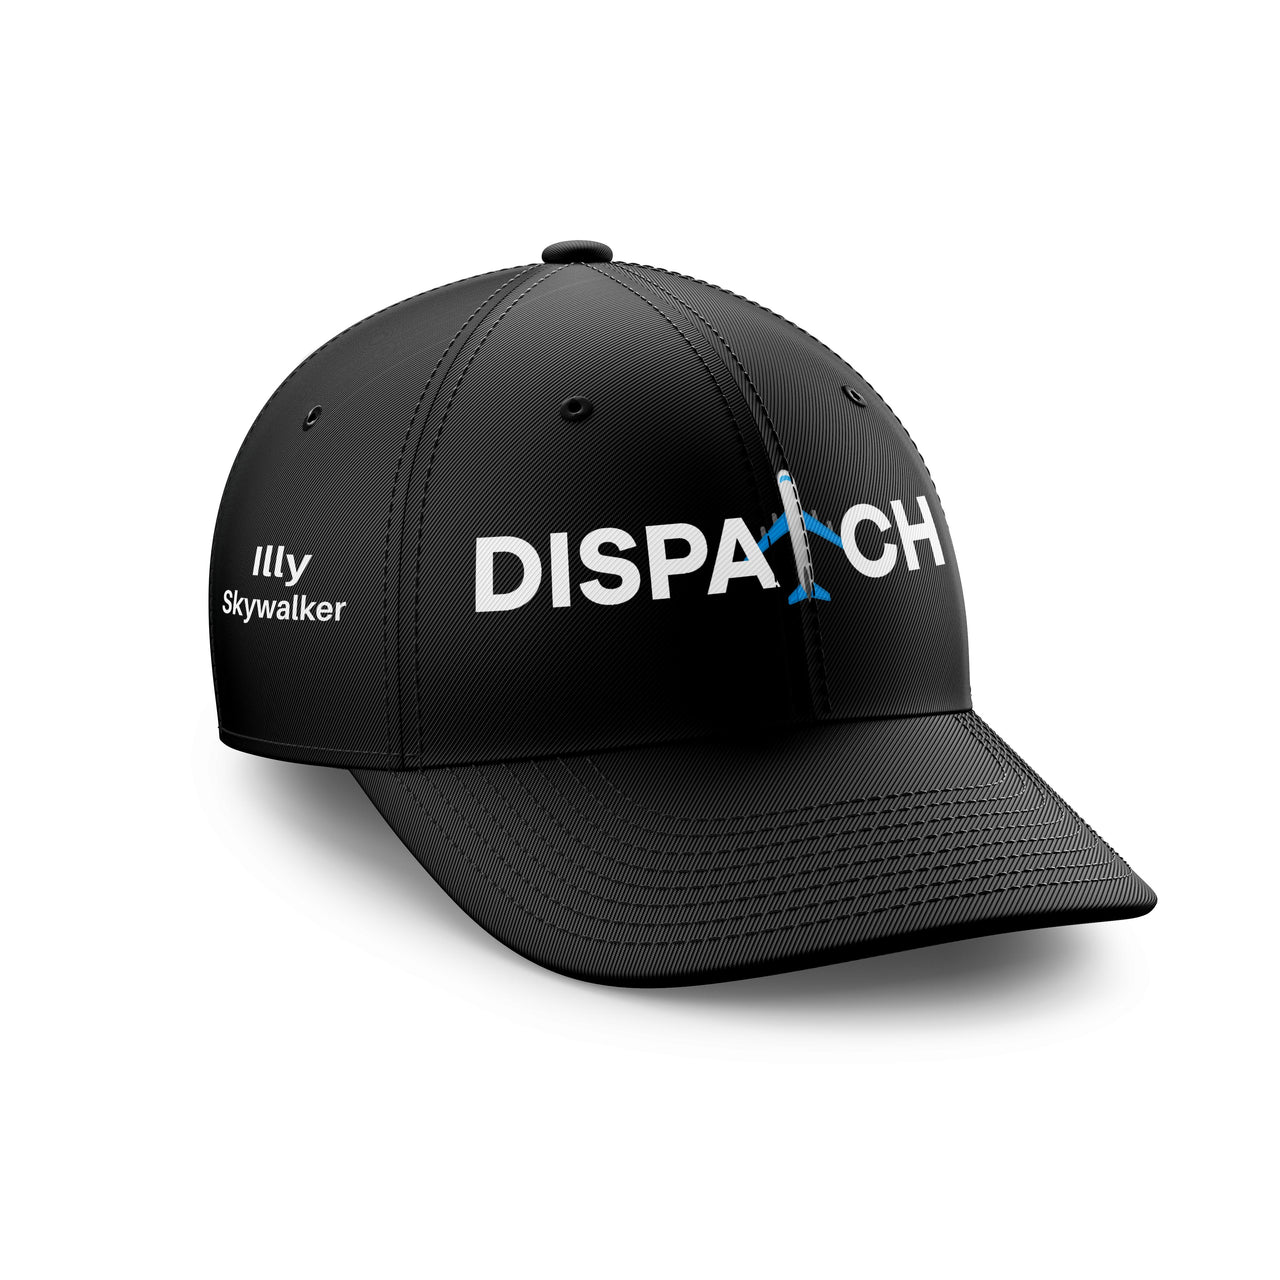 Customizable Name & Dispatch Embroidered Hats